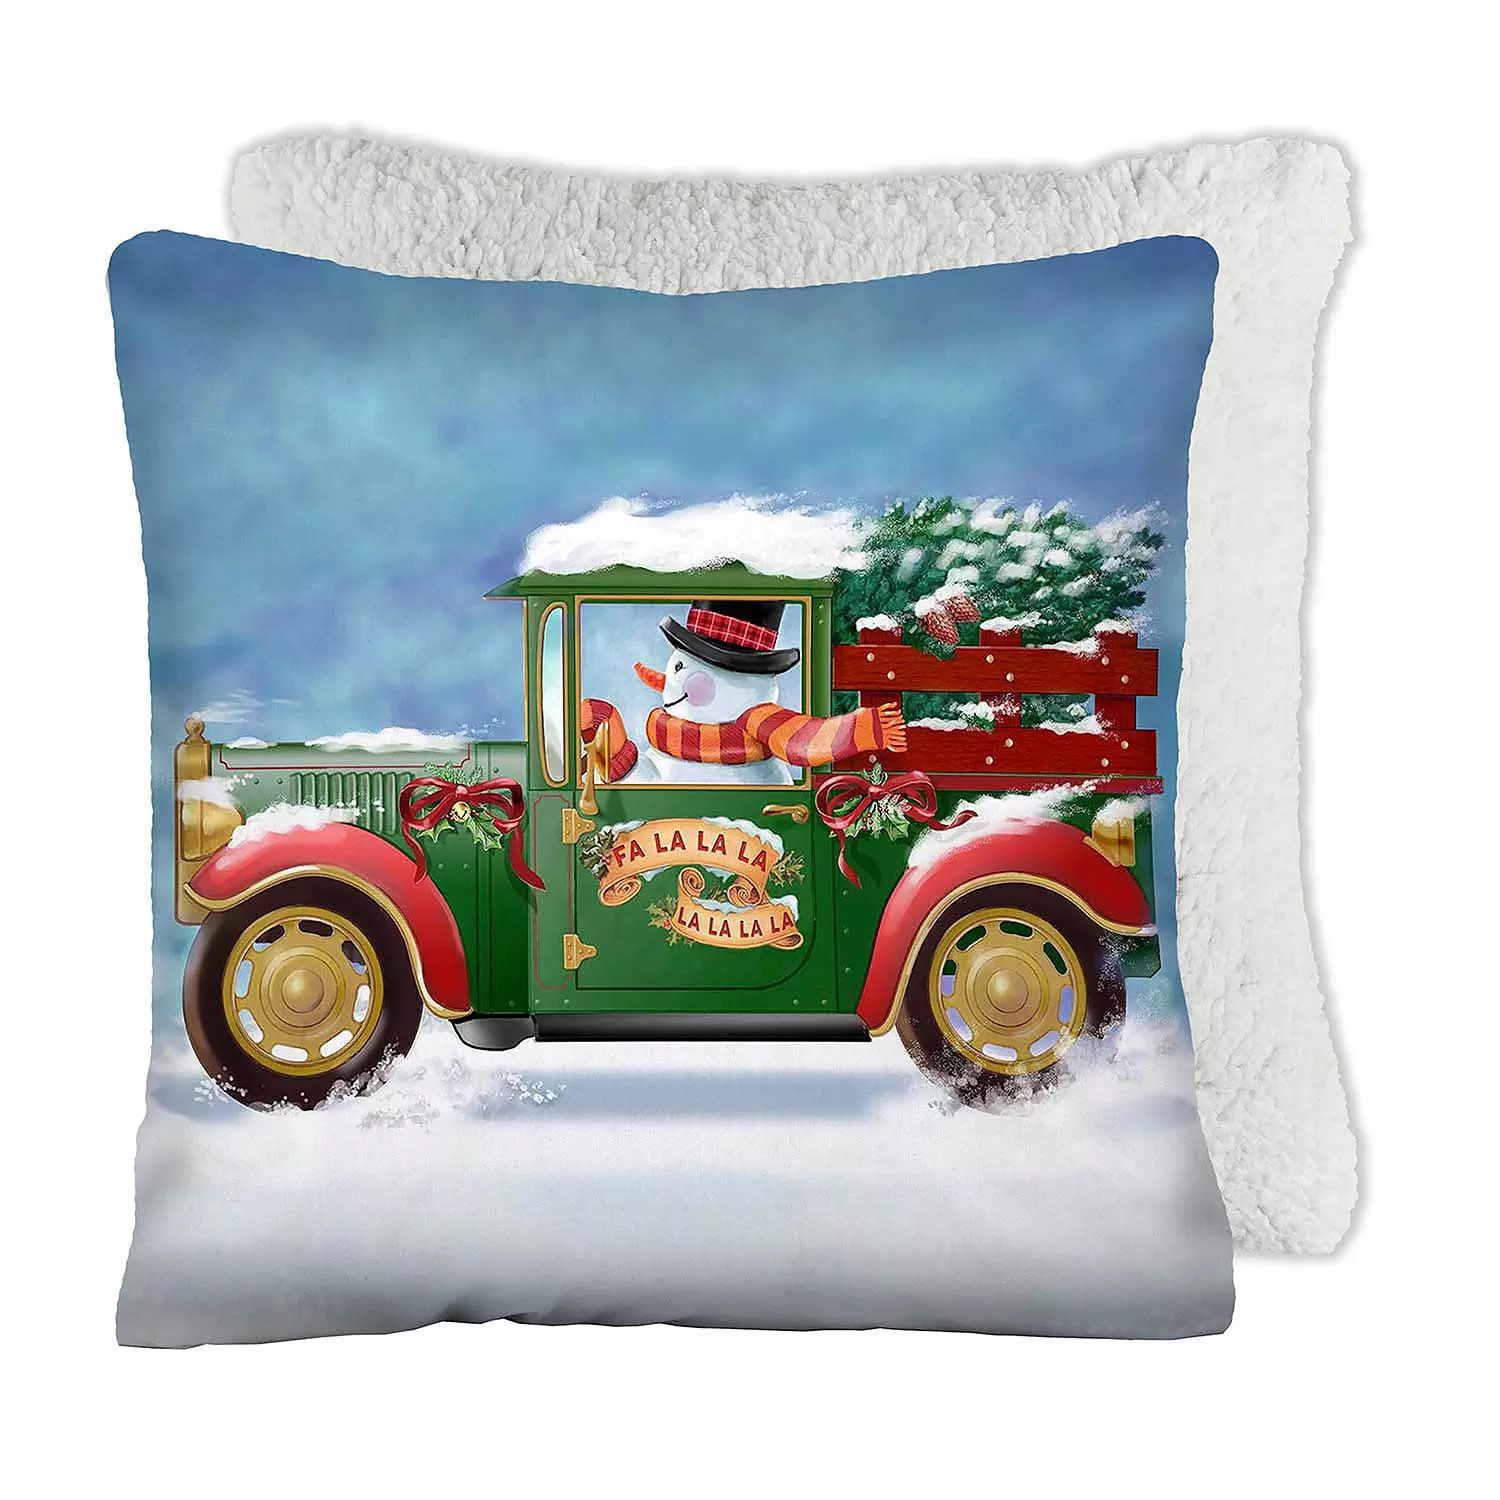 Printed cushion with sherpa backing, snowman, 17"x17"